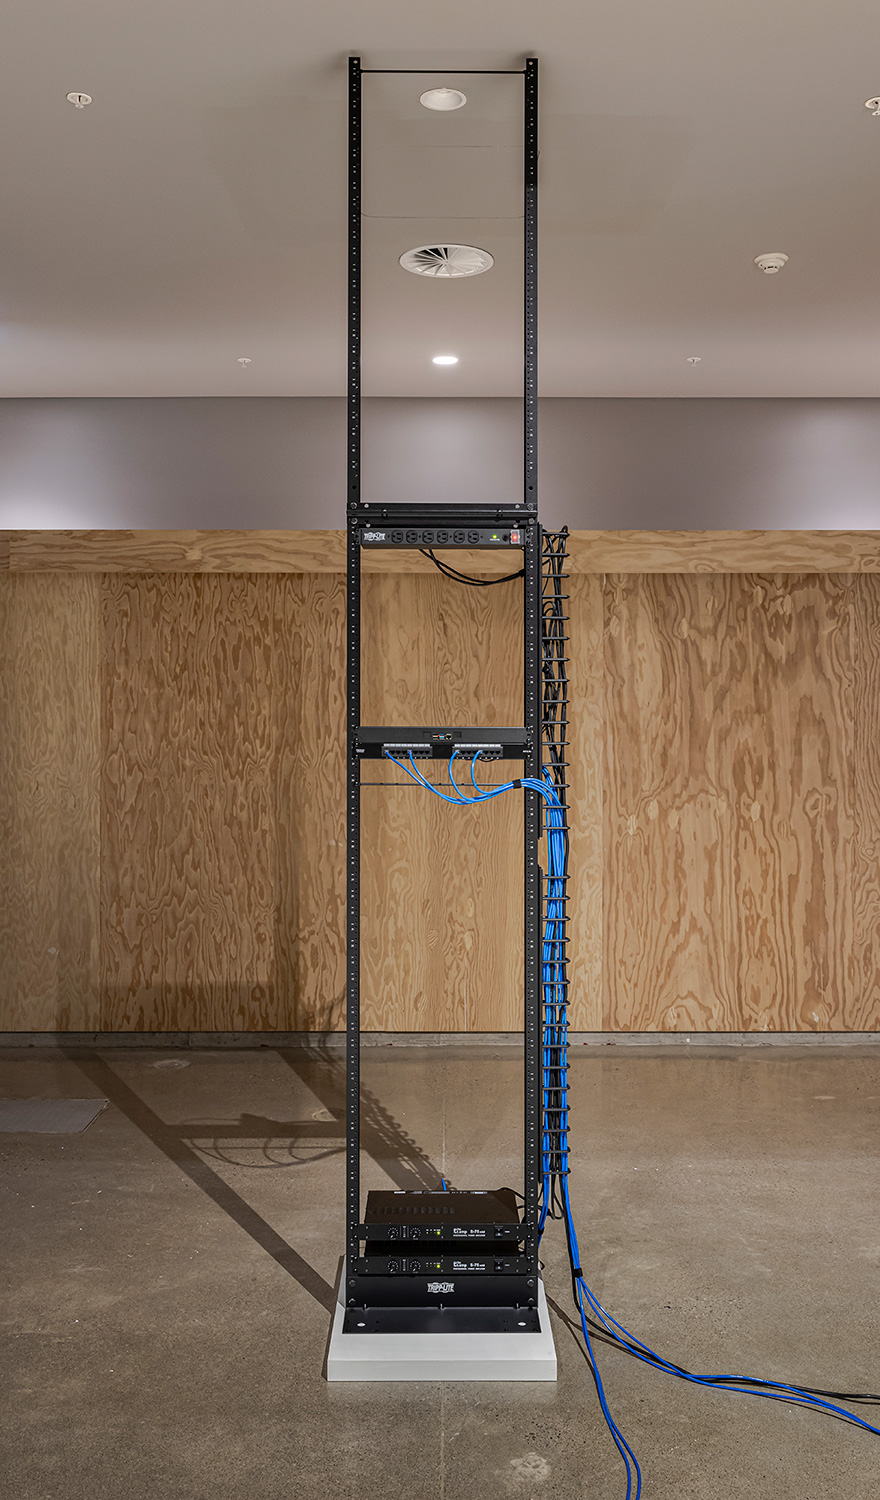 A modified server rack that extends to the ceiling. The rack is sparsely populated and sits on a small off-white plinth. A bundle of blue ethernet cables snakes down the side of the rack.